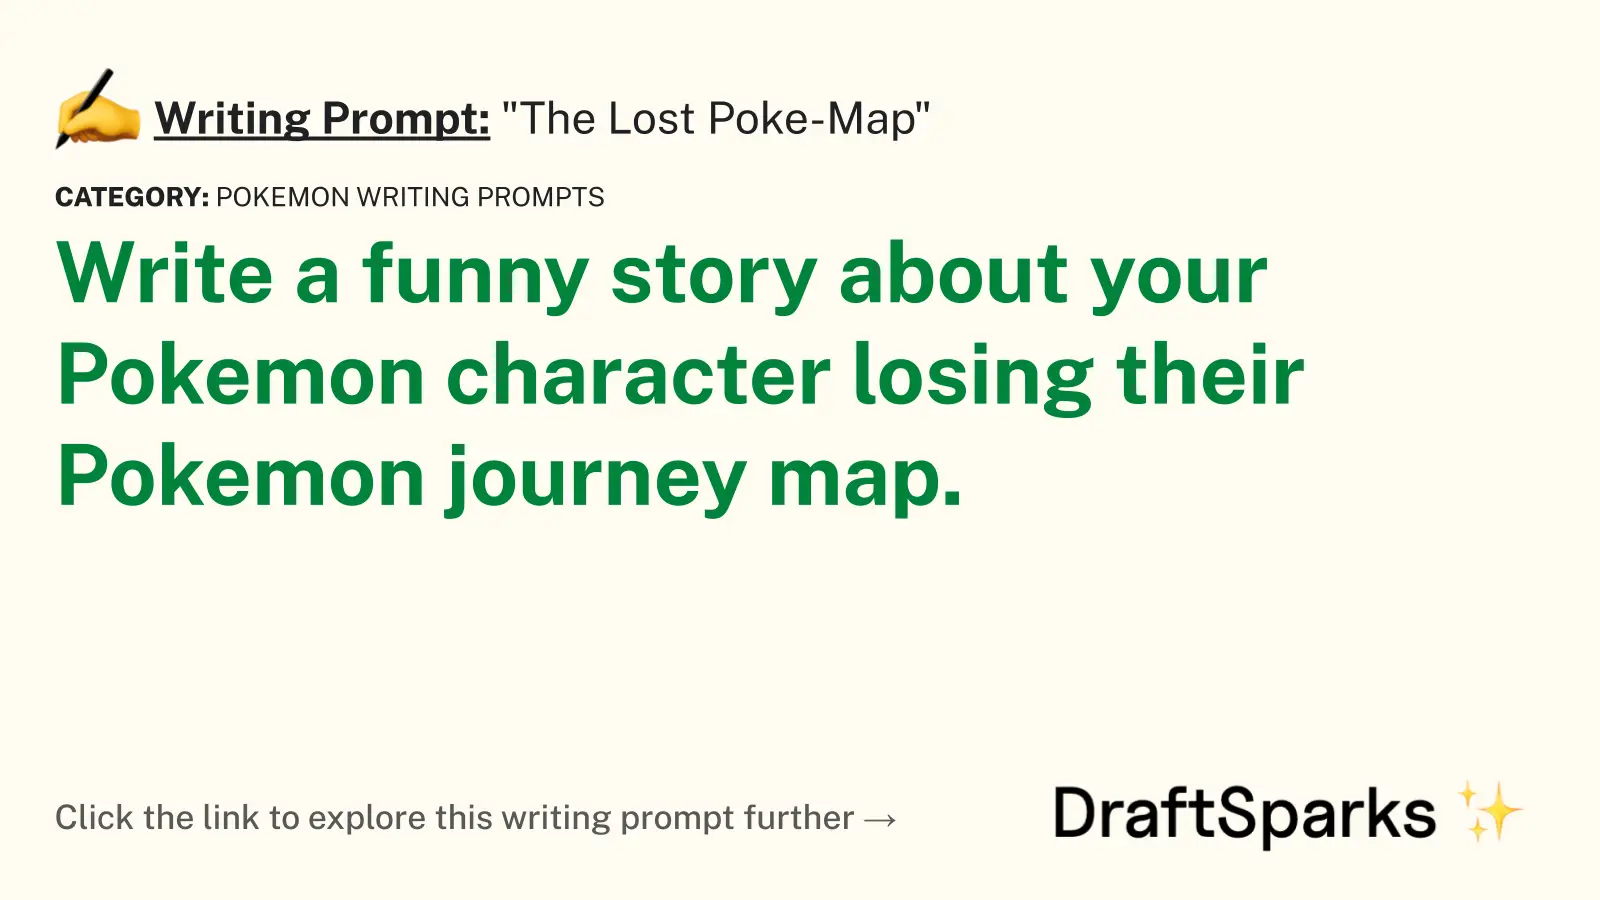 “The Lost Poke-Map”